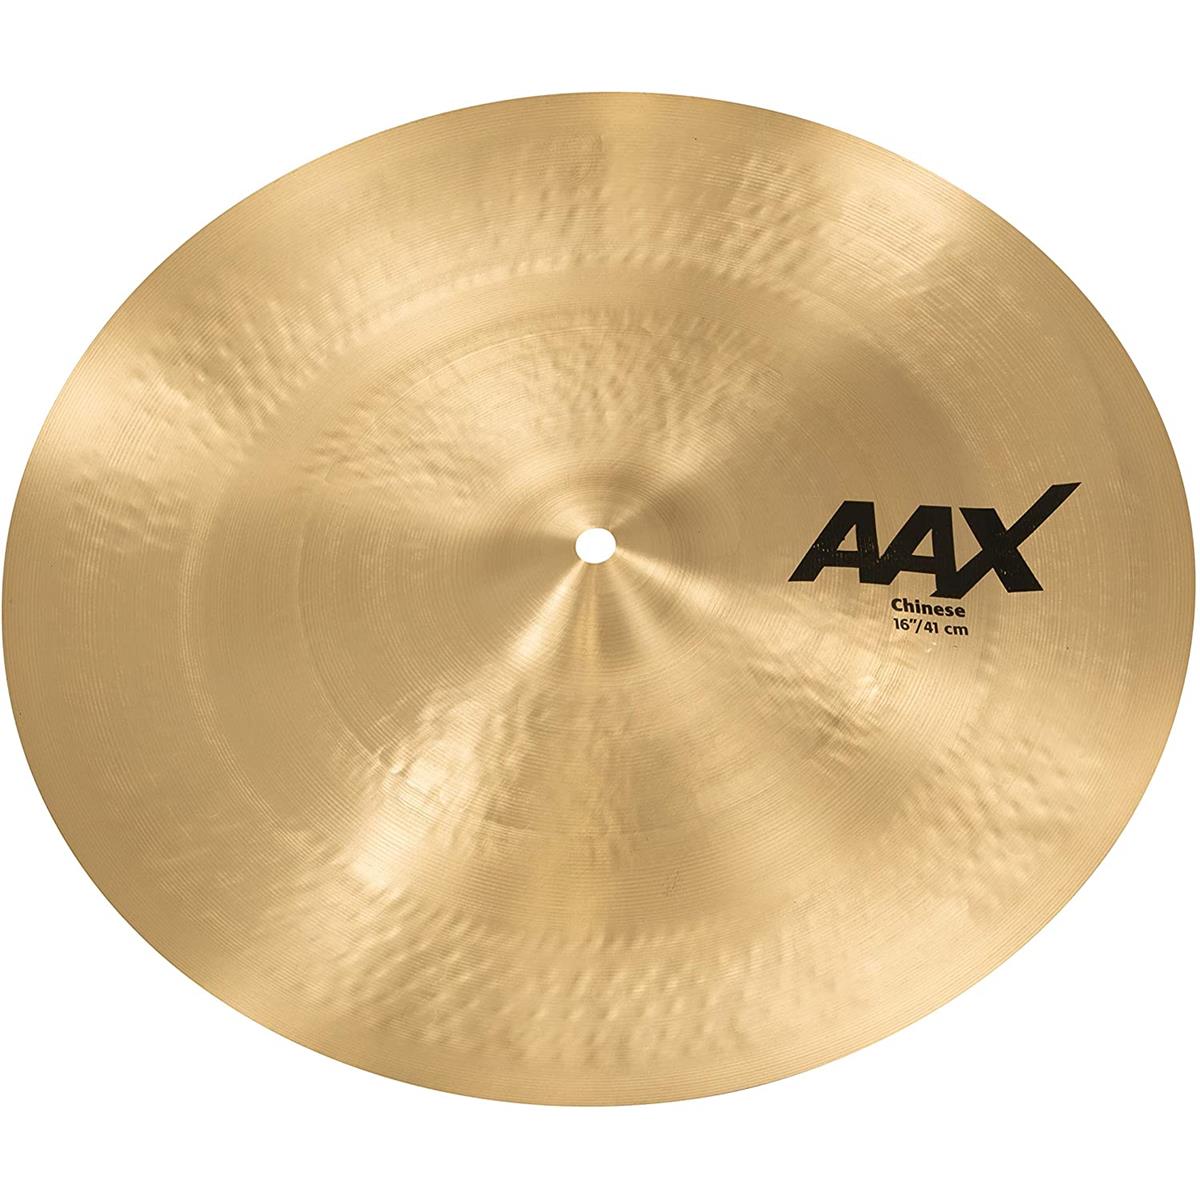 Sabian 16" AAX Chinese Cymbal, Thin, Natural Finish SABIAN 16" AAX Chinese delivers Modern Bright, biting response that is big, brash and trashy. The SABIAN AAX series delivers consistently bright, crisp, clear and cutting responses - AAX is the ultimate Modern Bright sound!